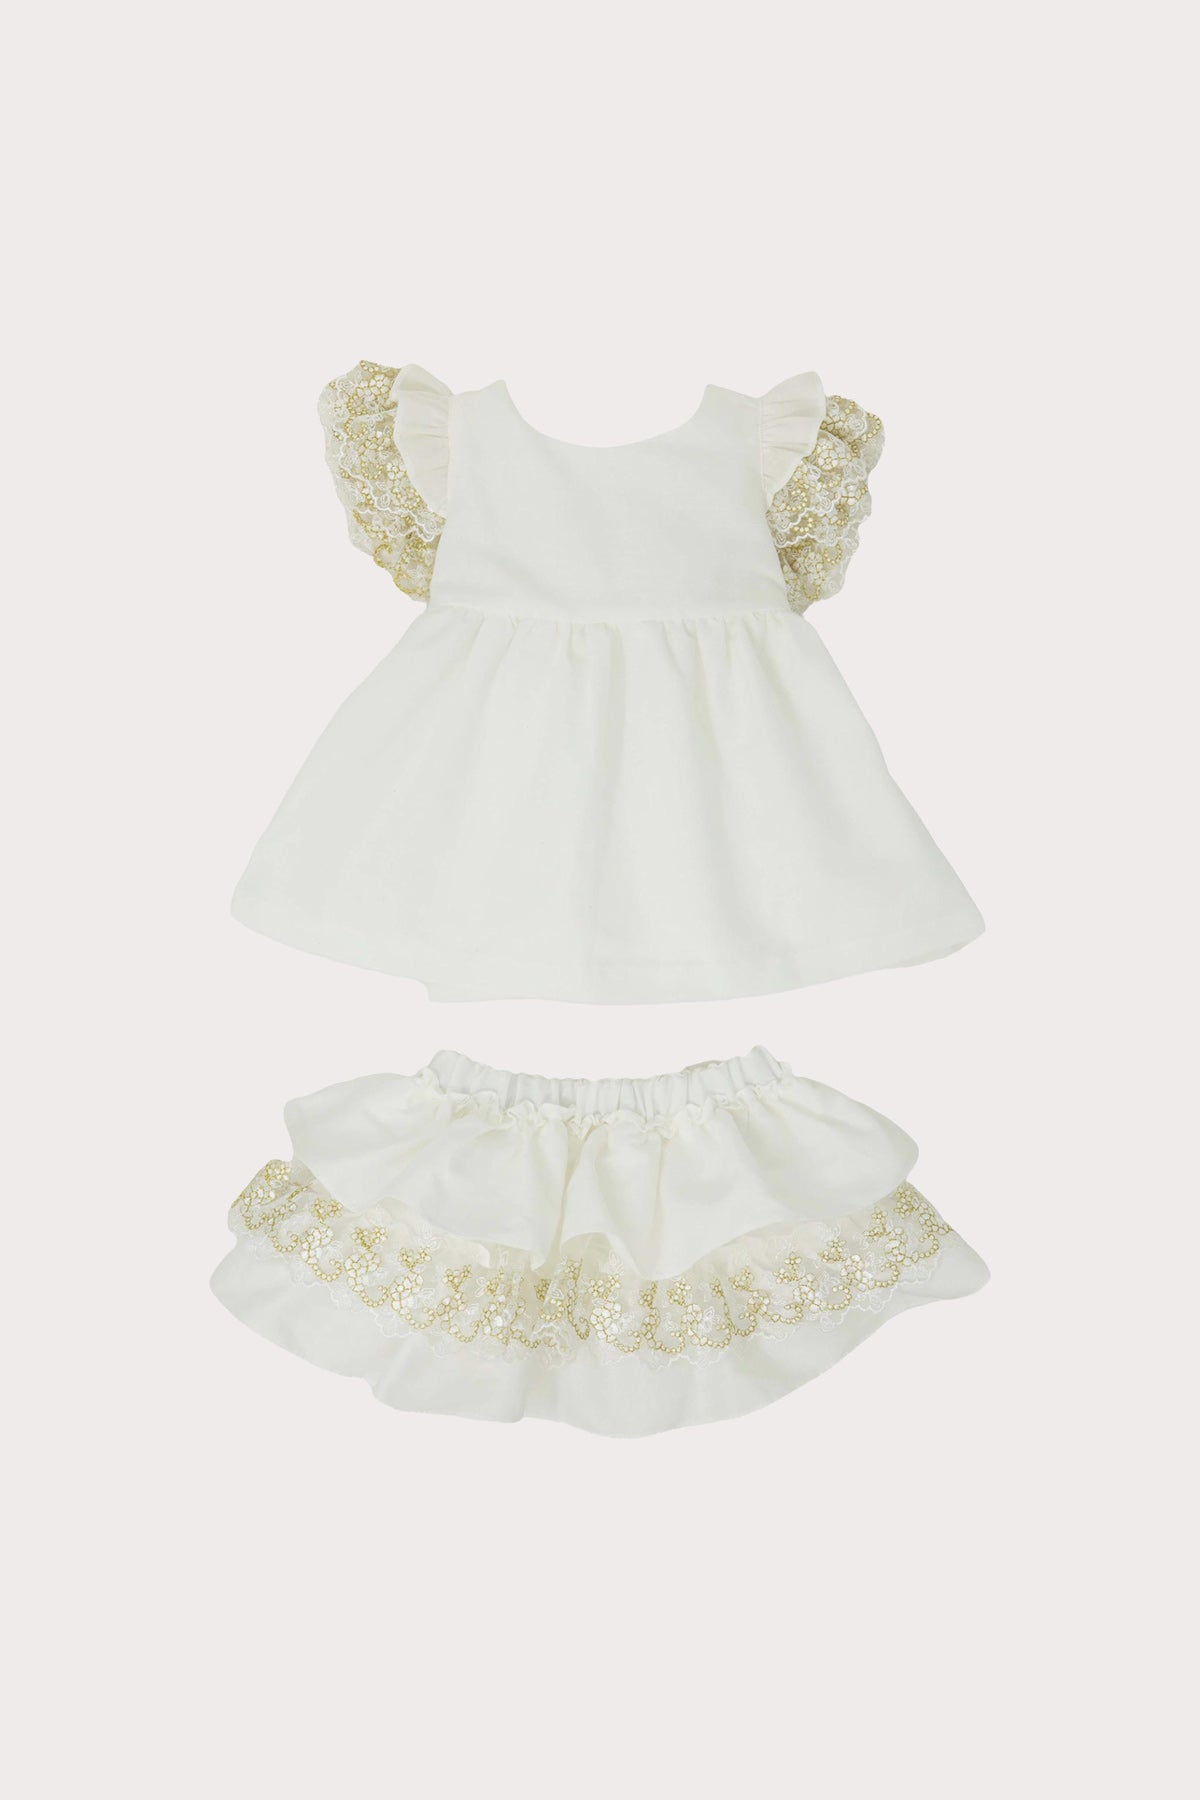 ivory linen top & bloomer outfit